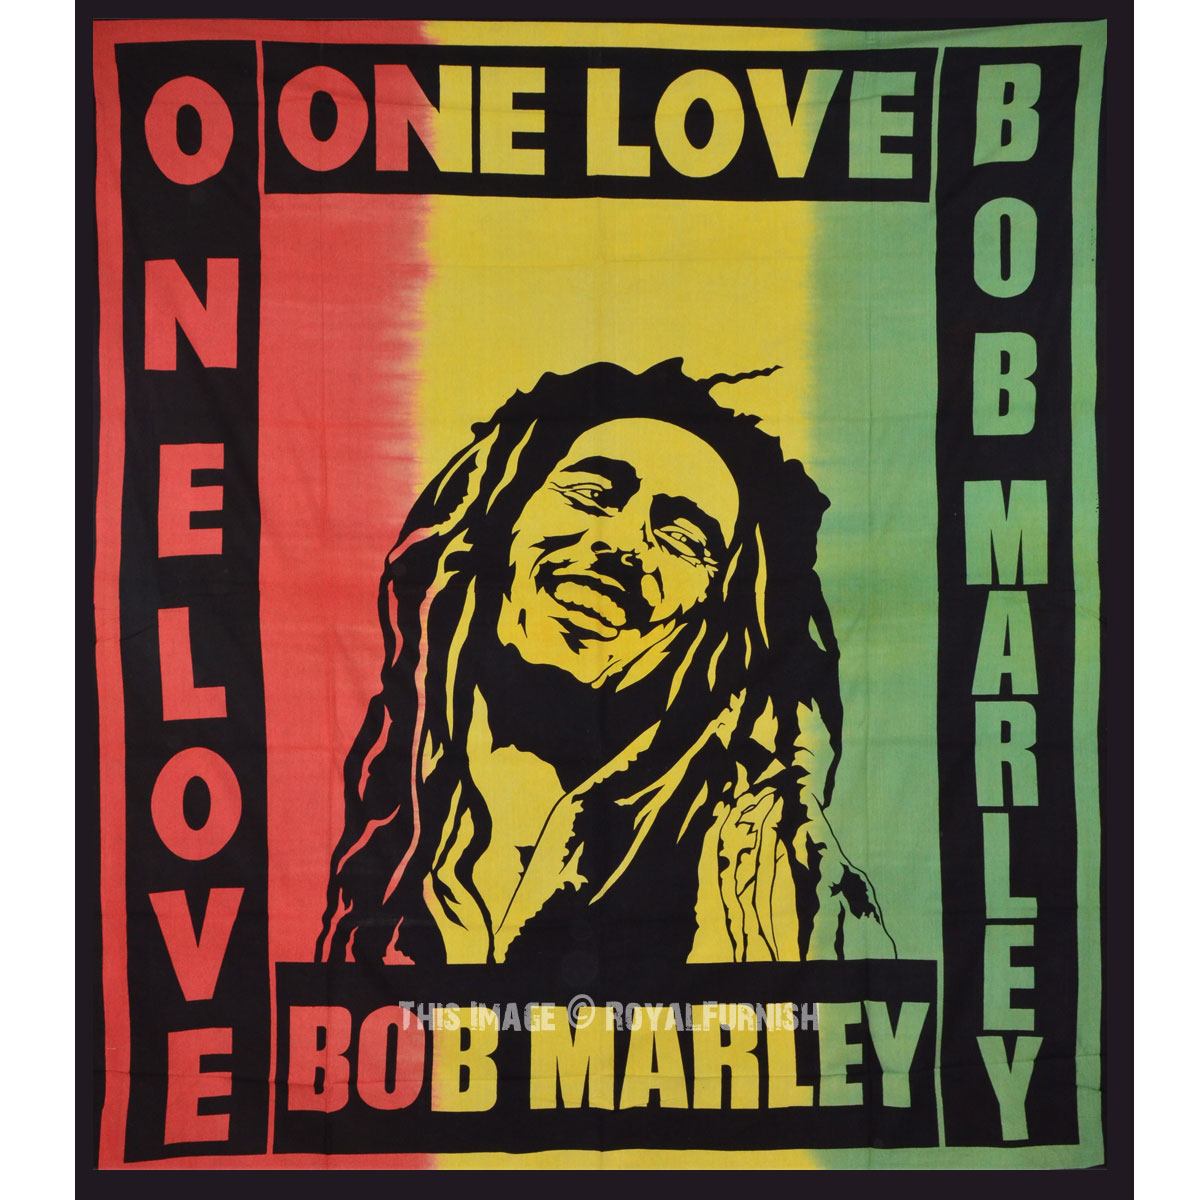 Details about   10 pcs Cotton Bob Marley Wall Hanging Tapestry Poster Throw Hippy Wholesale Lot 